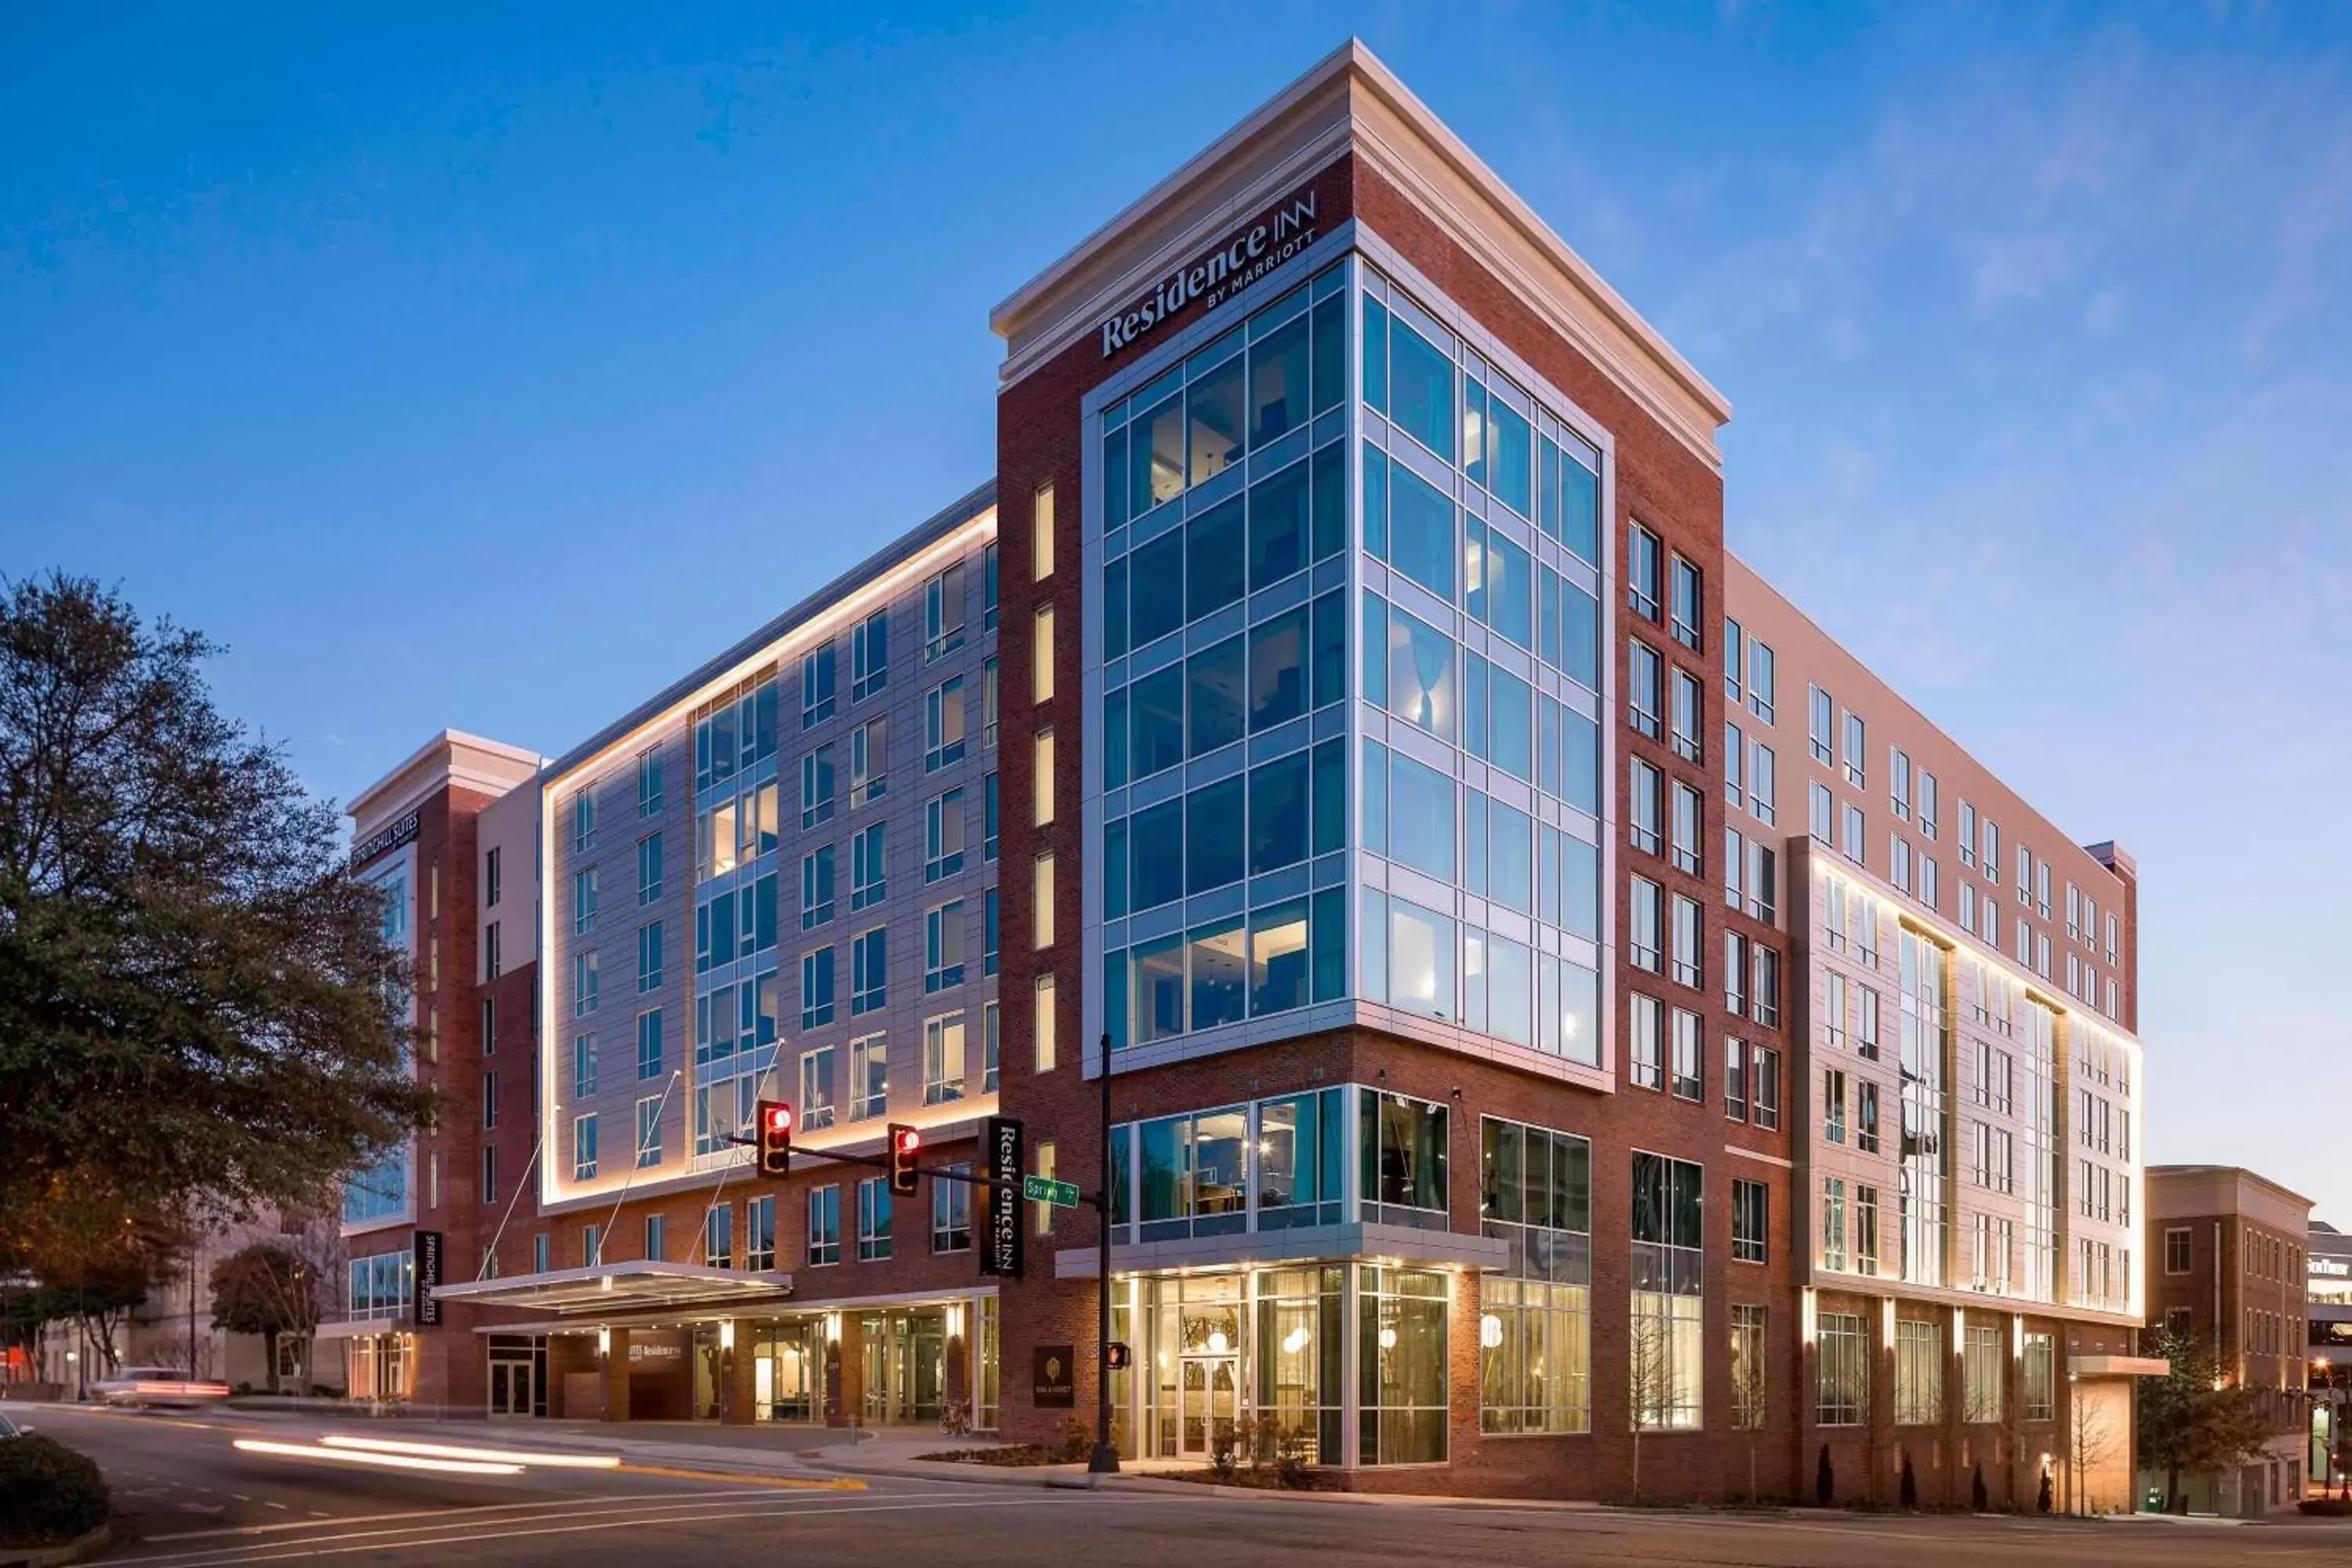 Property Building in Residence Inn by Marriott Greenville Downtown